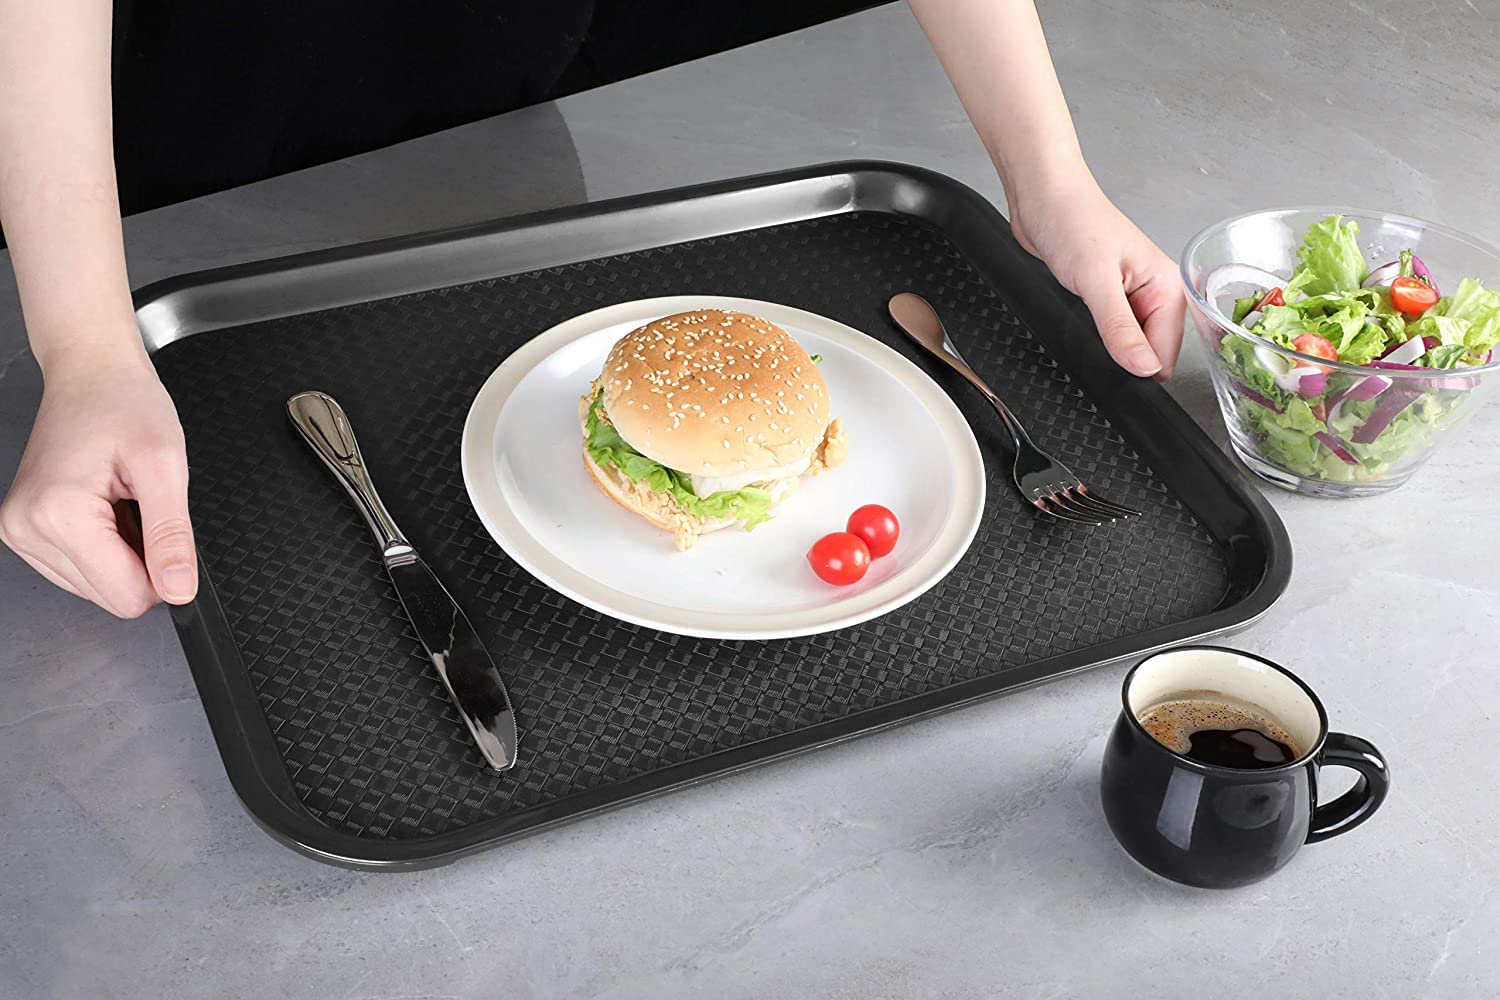 NJ Plastic Serving Platter Large Tray Unbreakable Snacks Tea Serving Tray Black Drink Breakfast Tea Dinner Coffee Salad Food for Dinning Table Home Kitchen (16 X 12 Inches) : 2 Pcs.